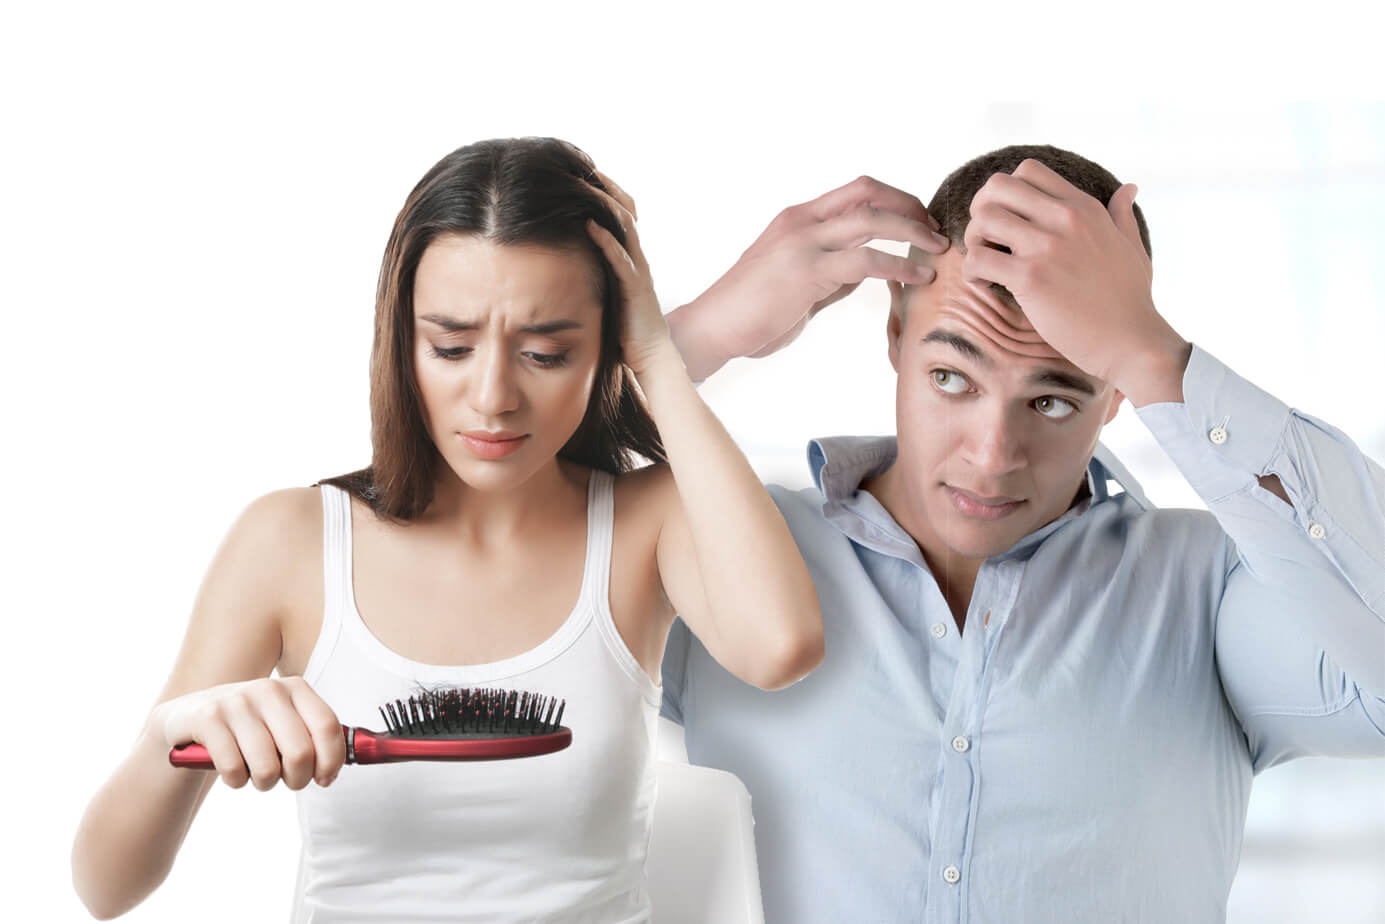 Saw Palmetto Prevents Hair Loss in Men and Women